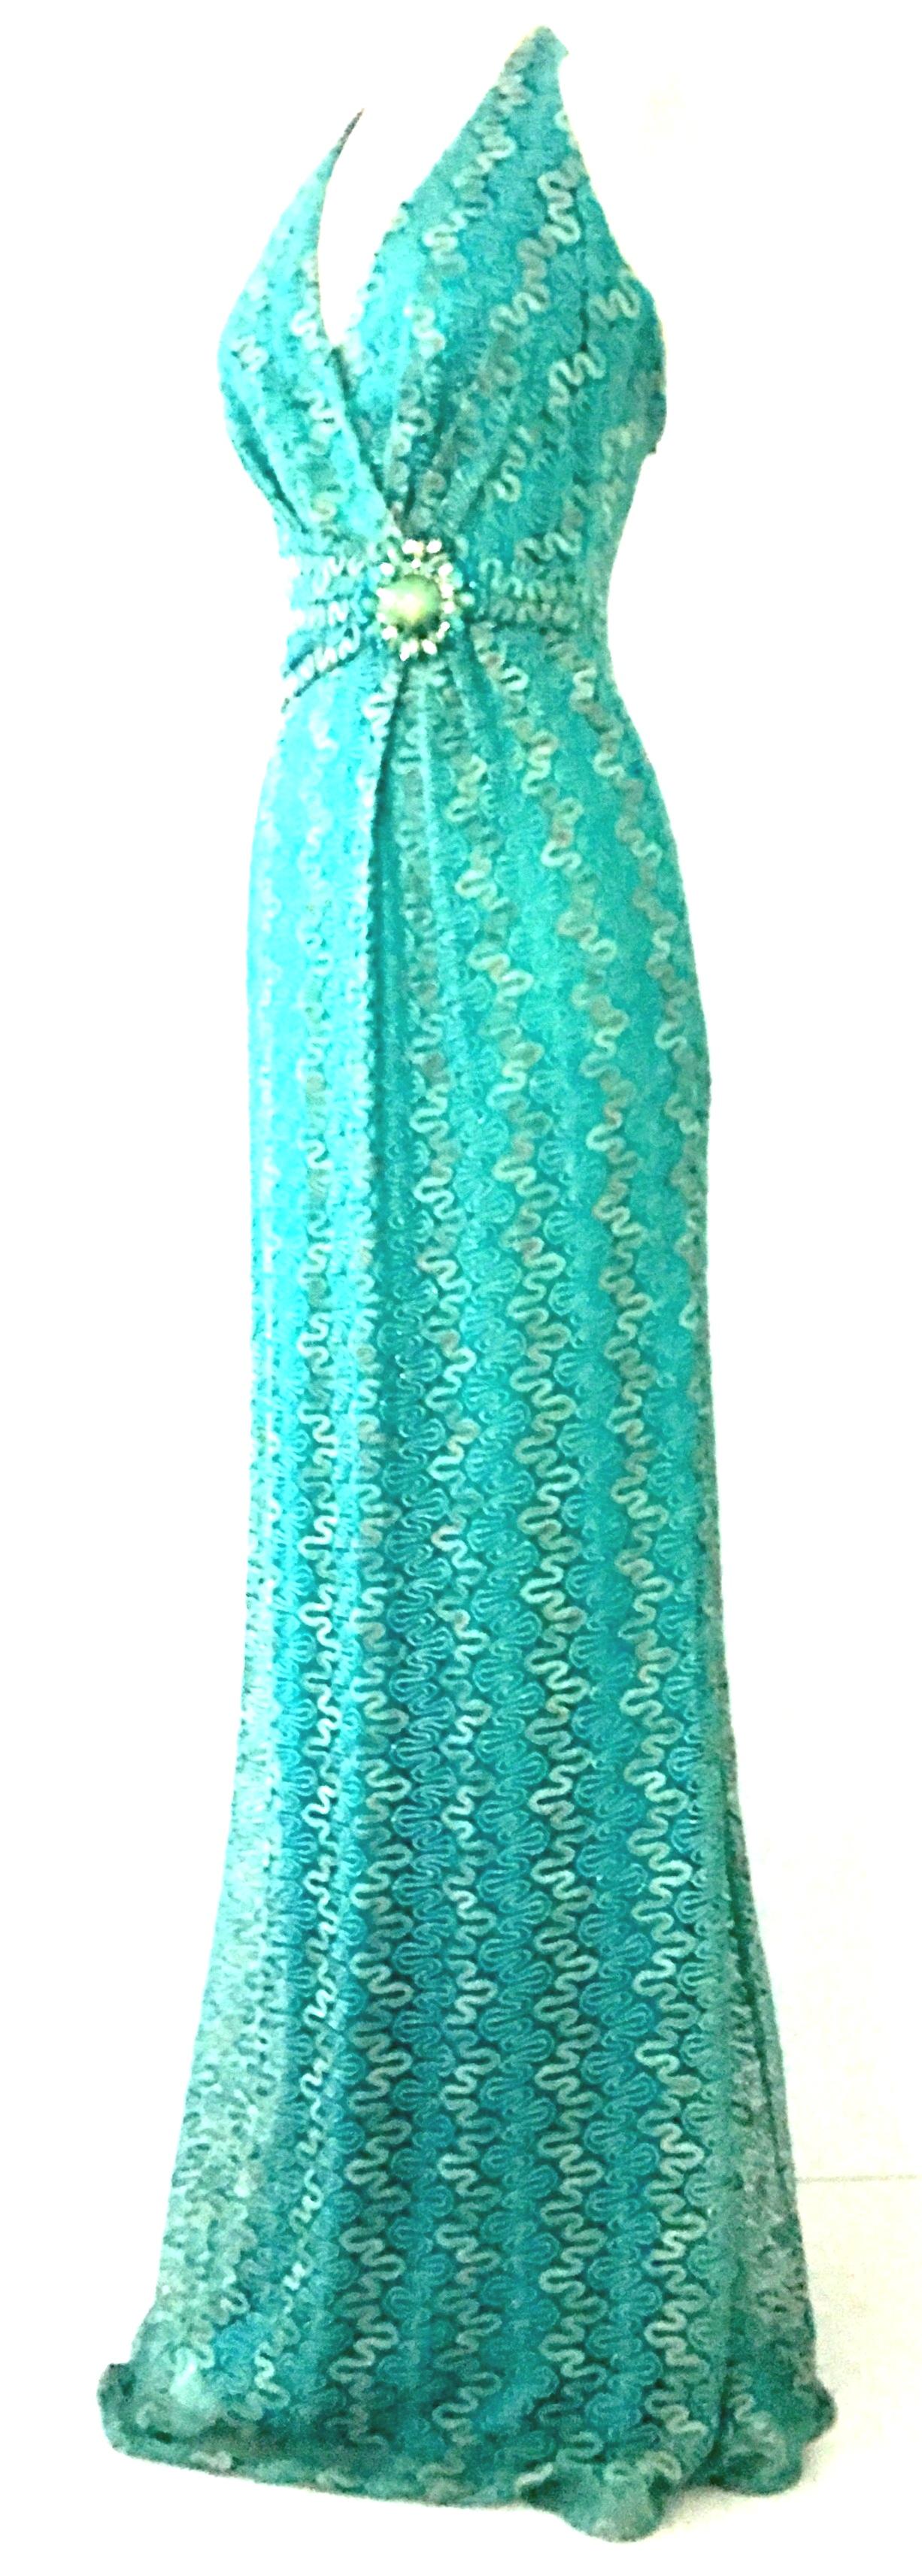 21st Century Contemporary & New With Tags, Missoni Style Maxi Halter Dress By, David Meister. Features a teal knit ground with silver metallic threading detail. The faux belt at the waist features a large 